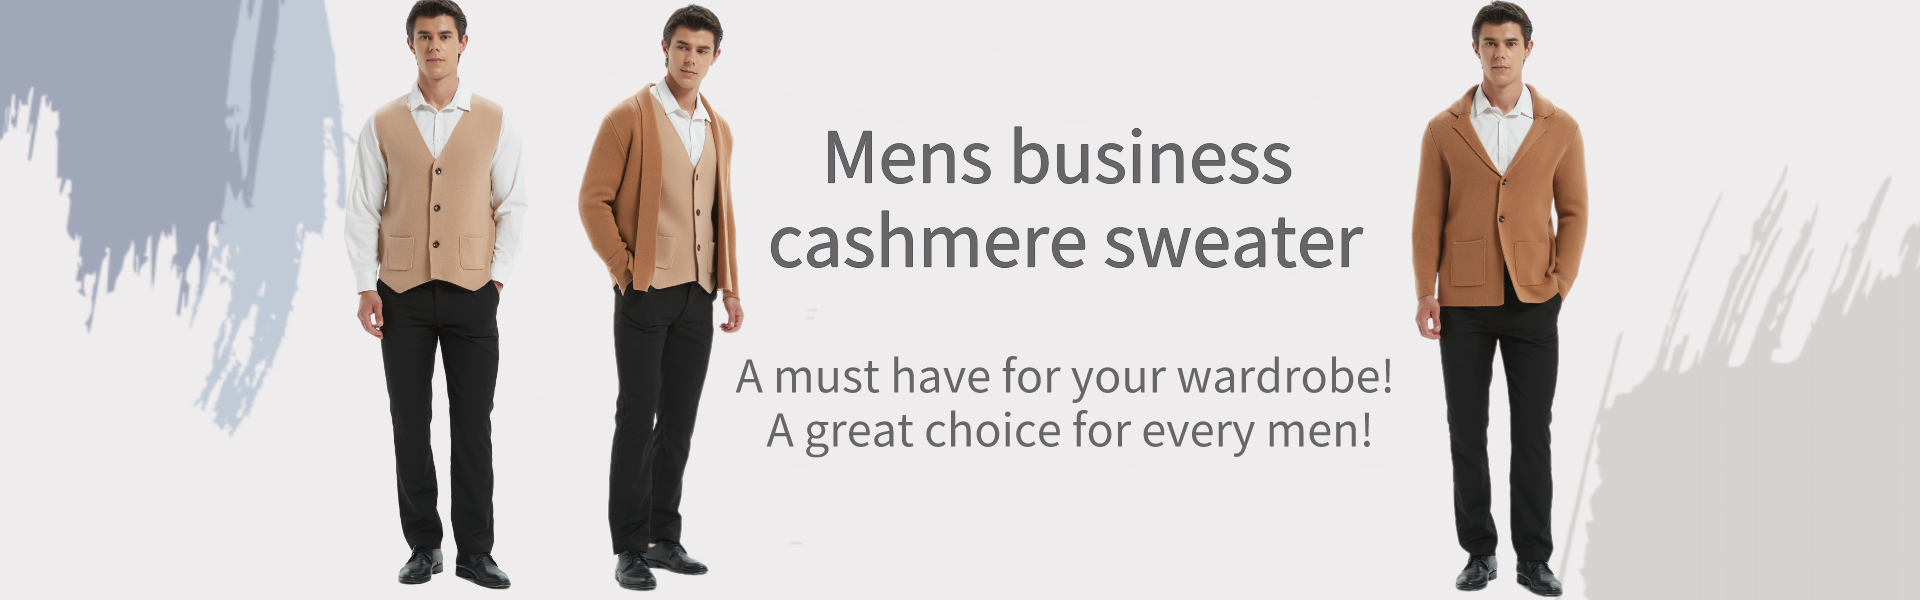 Mens business cashmere sweater